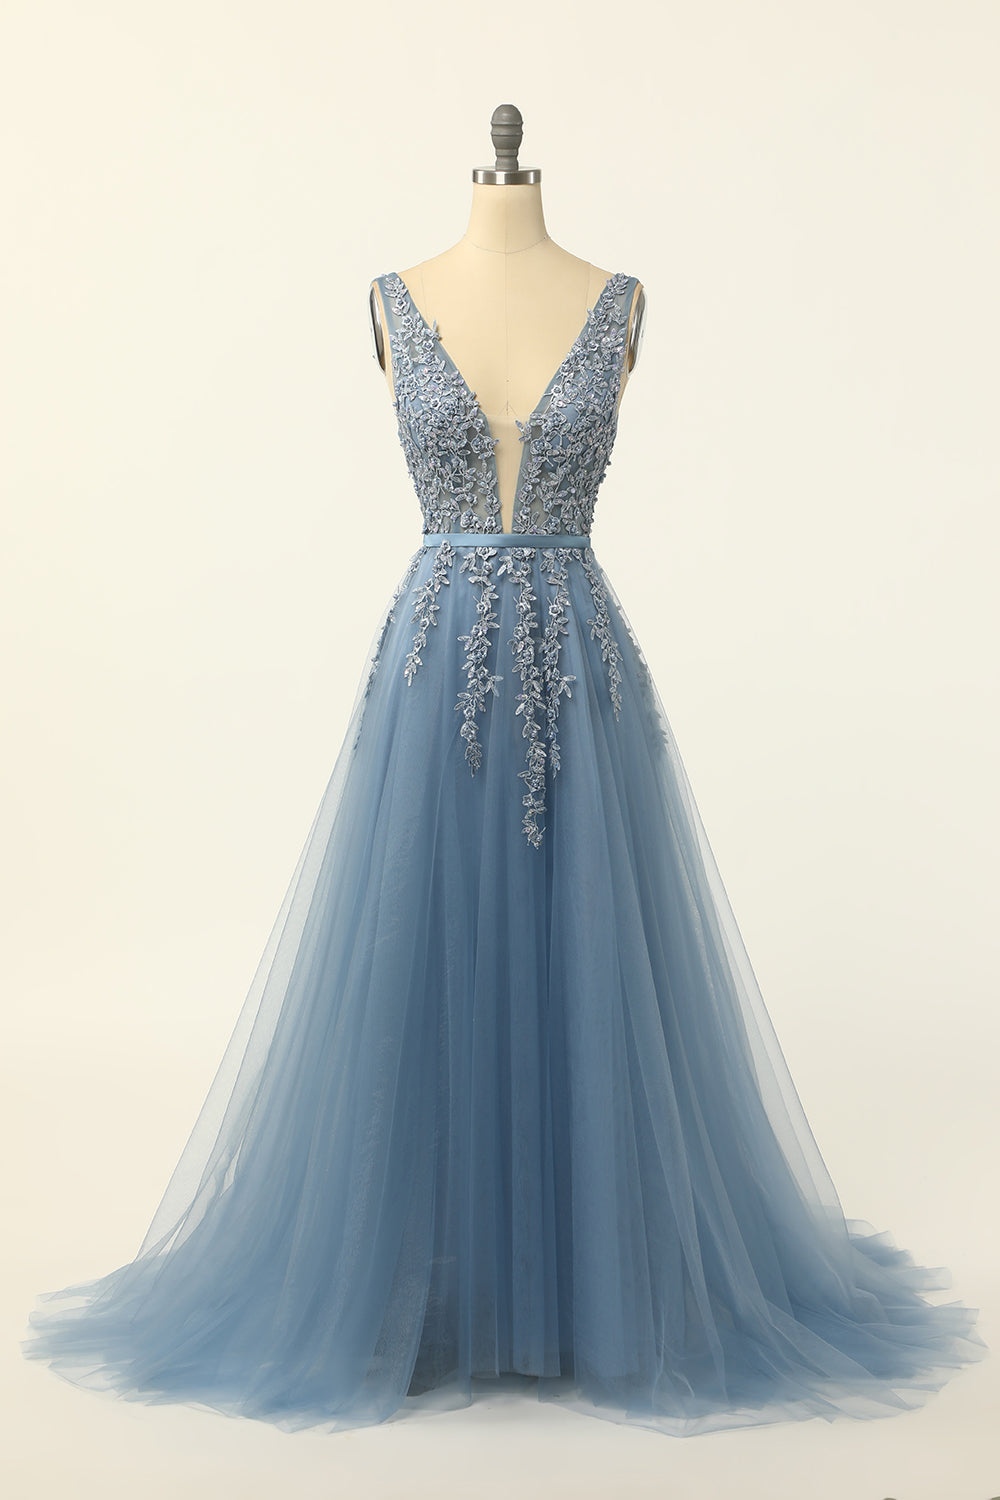 Blue Tulle Corset Prom Dress with Appliques Gowns, Ball Dress